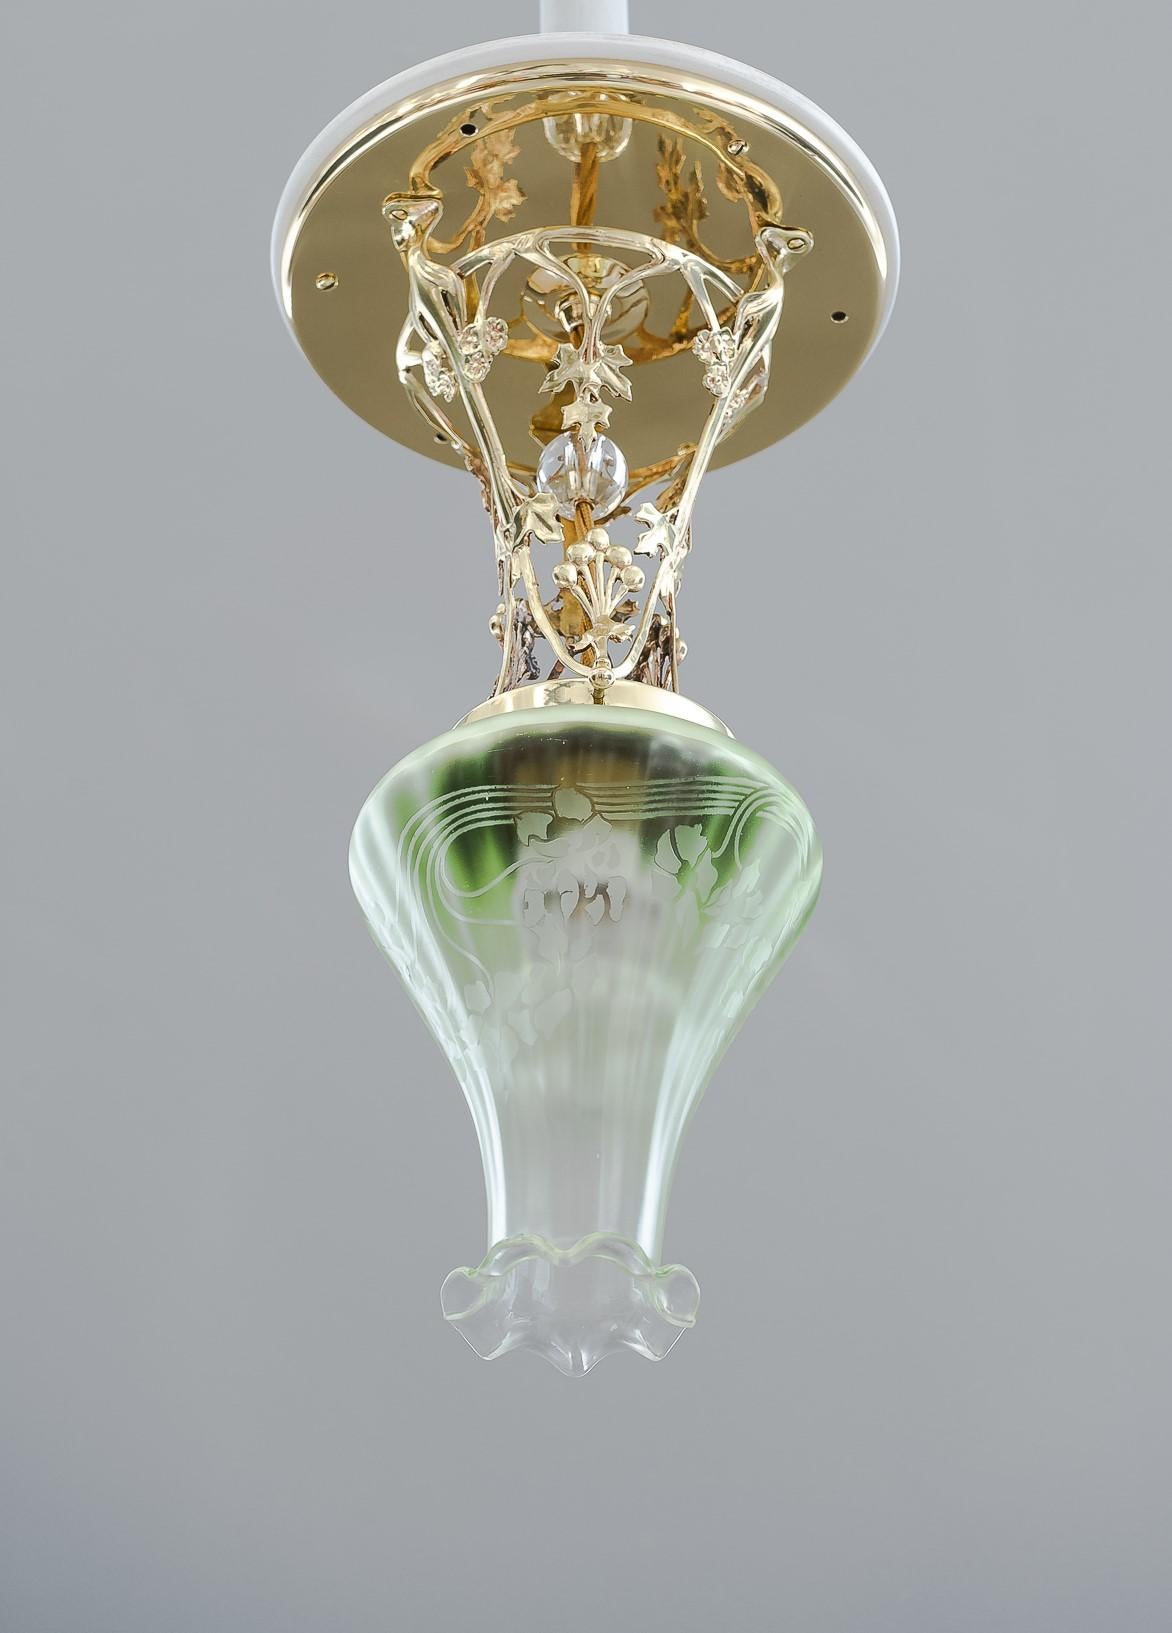 Early 20th Century Jugendstil Ceiling Lamp Vienna circa 1908 with Original Glass Shade For Sale